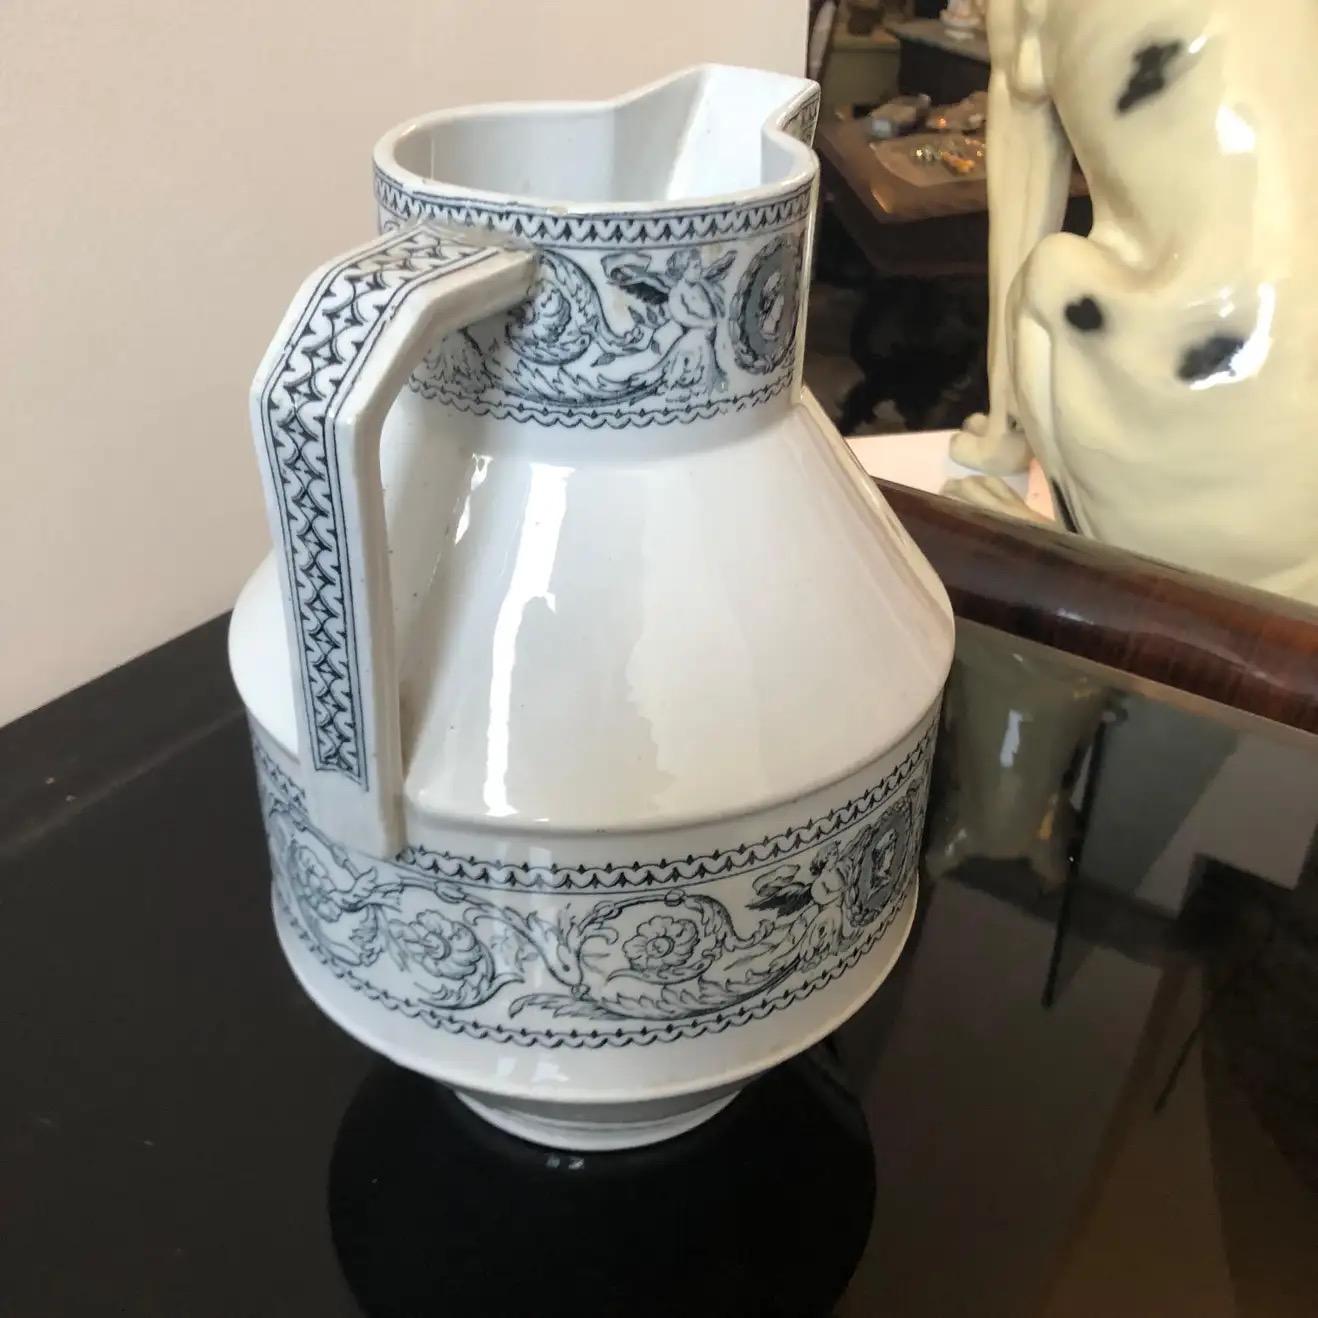 1870s Victorian Aesthetic-Style Blue & White English Ceramic Jug For Sale 2